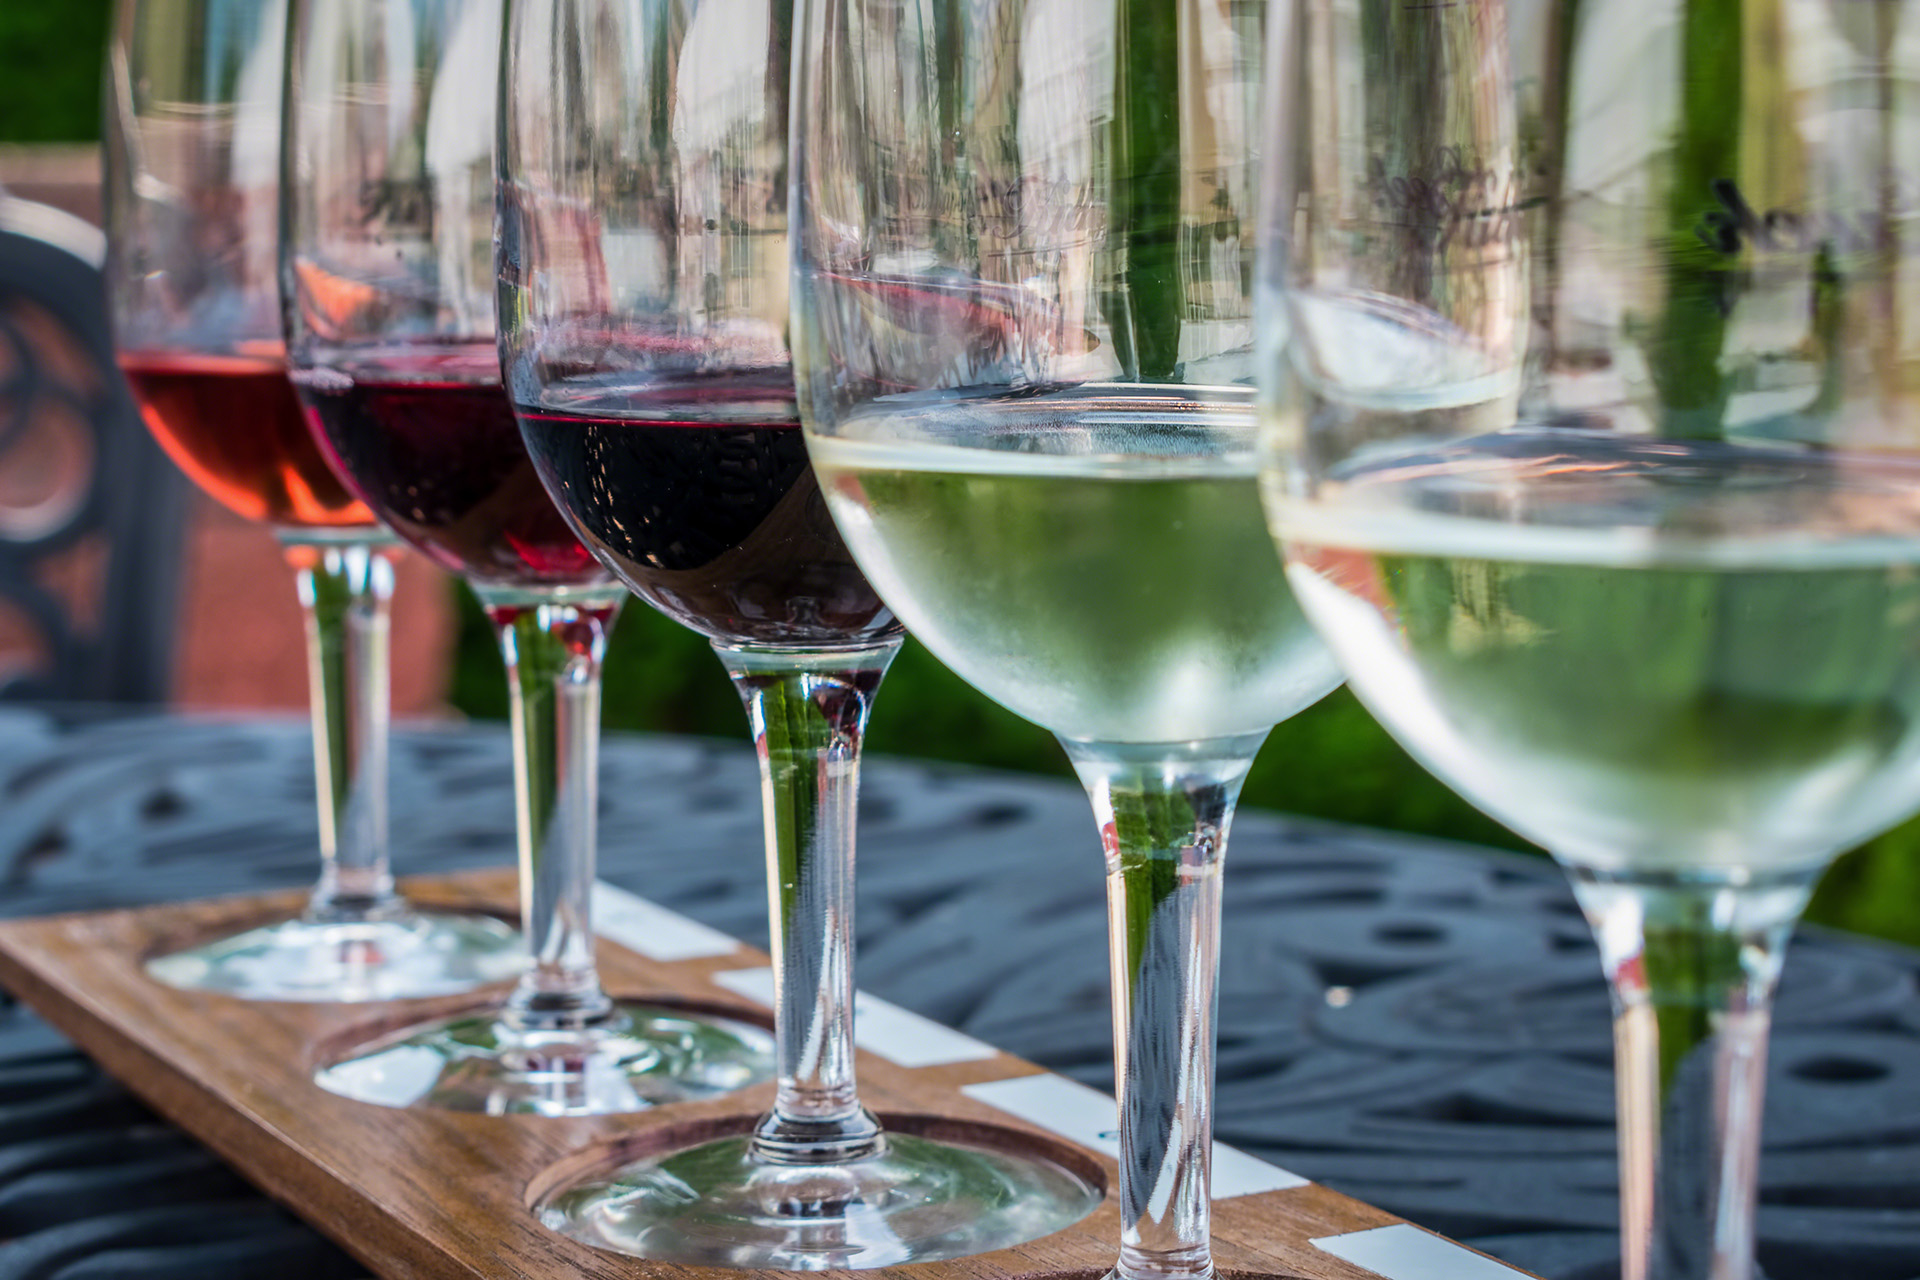 Glasses of red and white wine lined up for a wine tasting